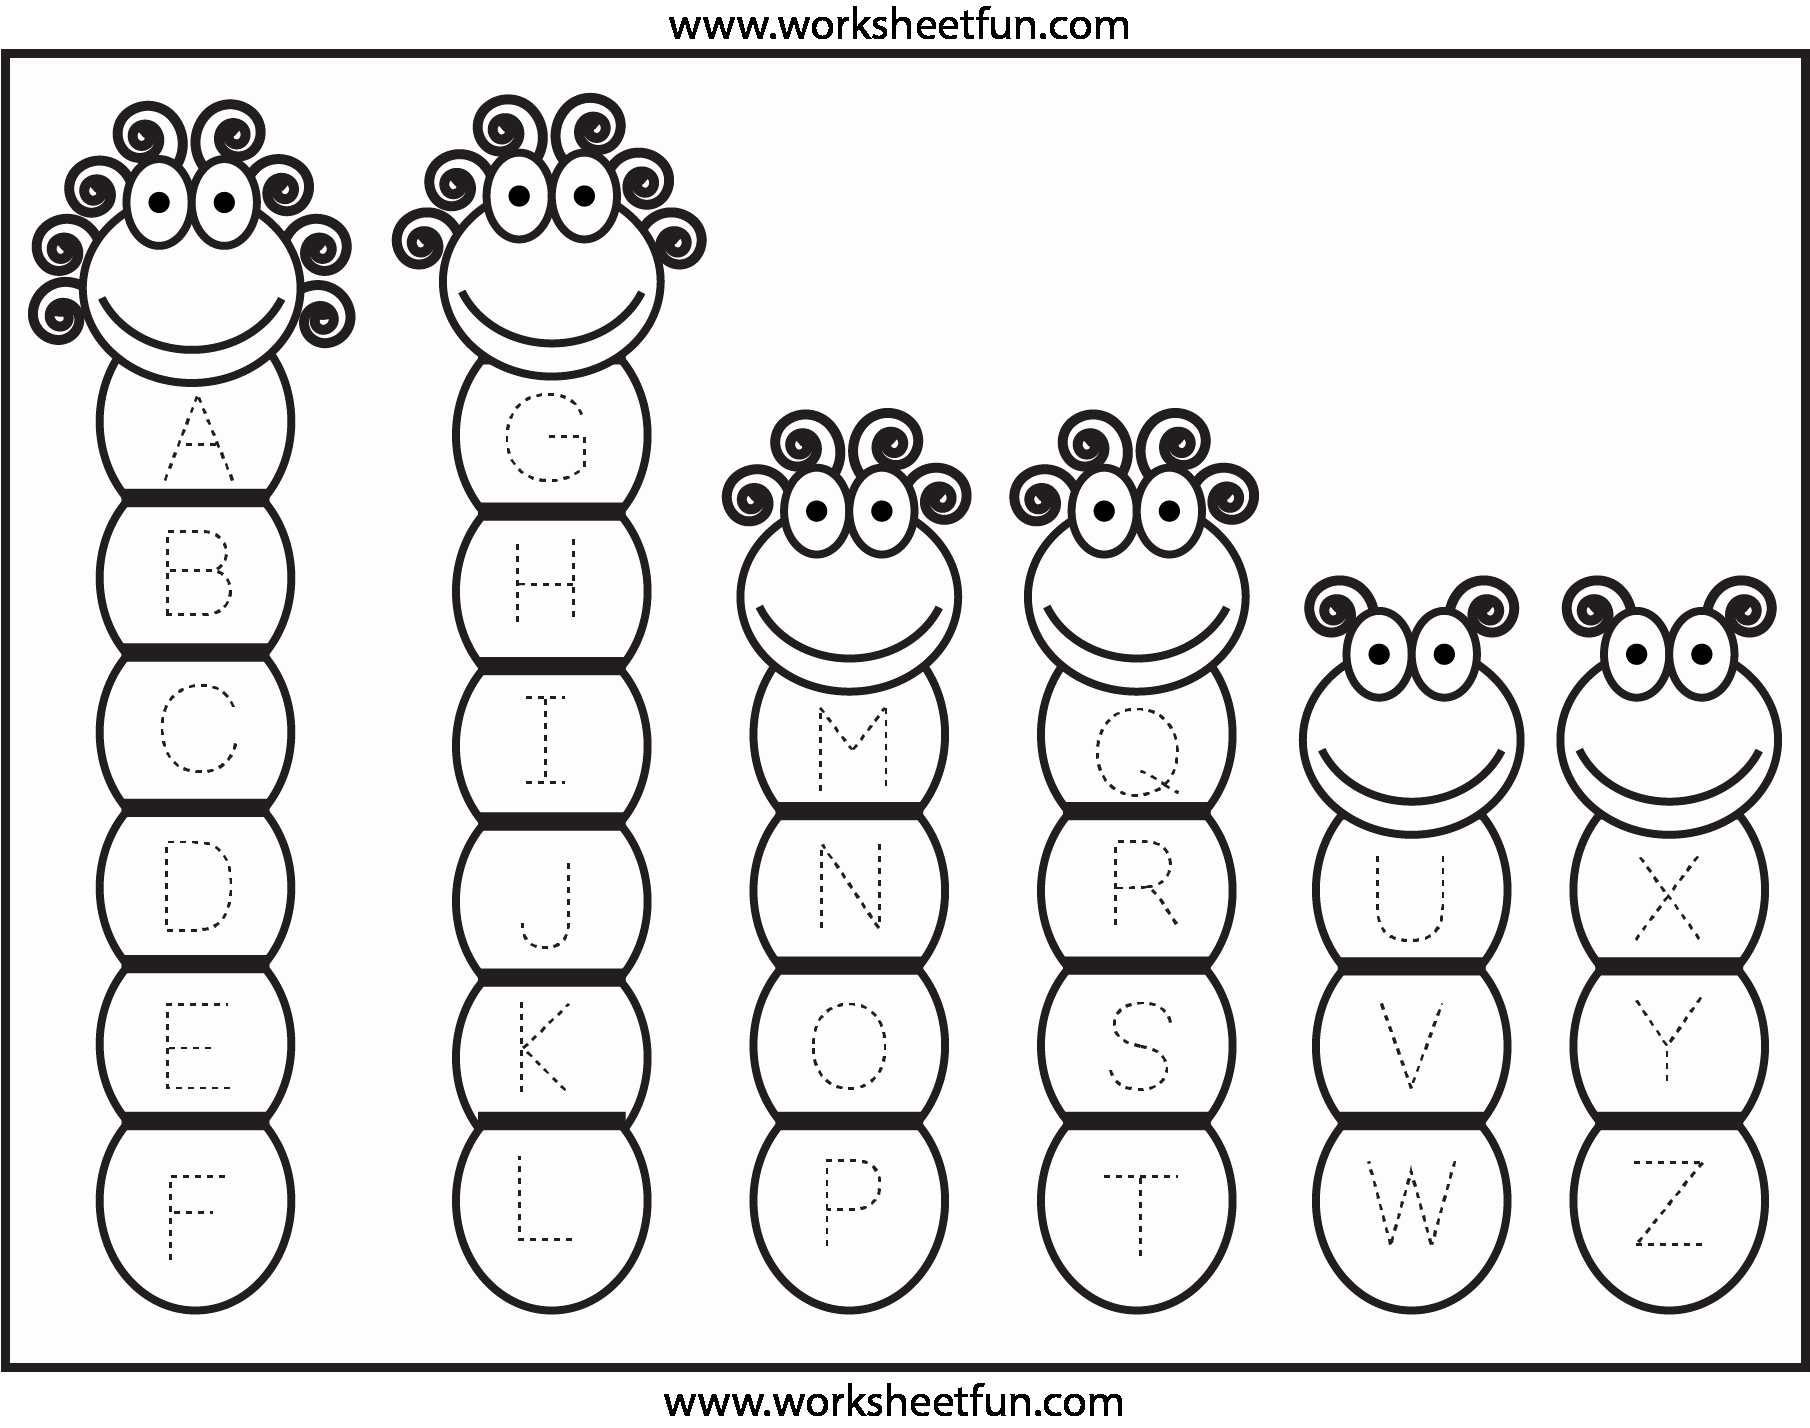 Learning Letters and Numbers Worksheets Along with 11 Awesome Worksheet Preschool